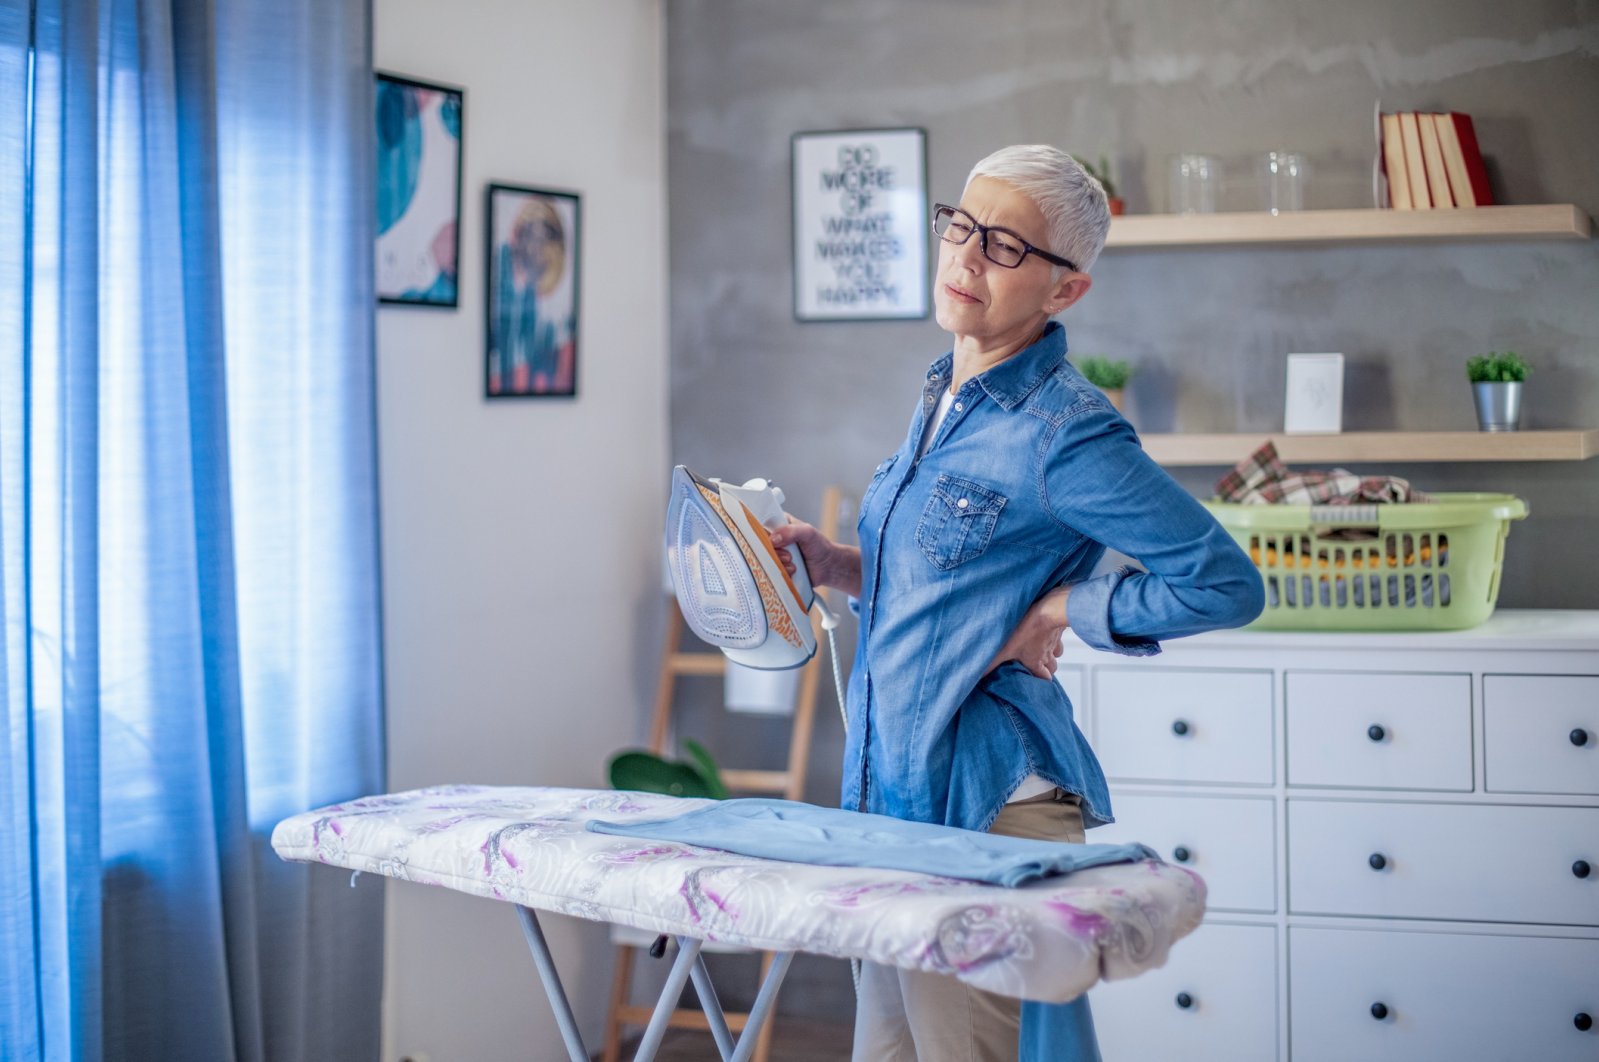 If you are not careful about your posture, you can really injure yourself while doing chores around the house. (iStock Photo)